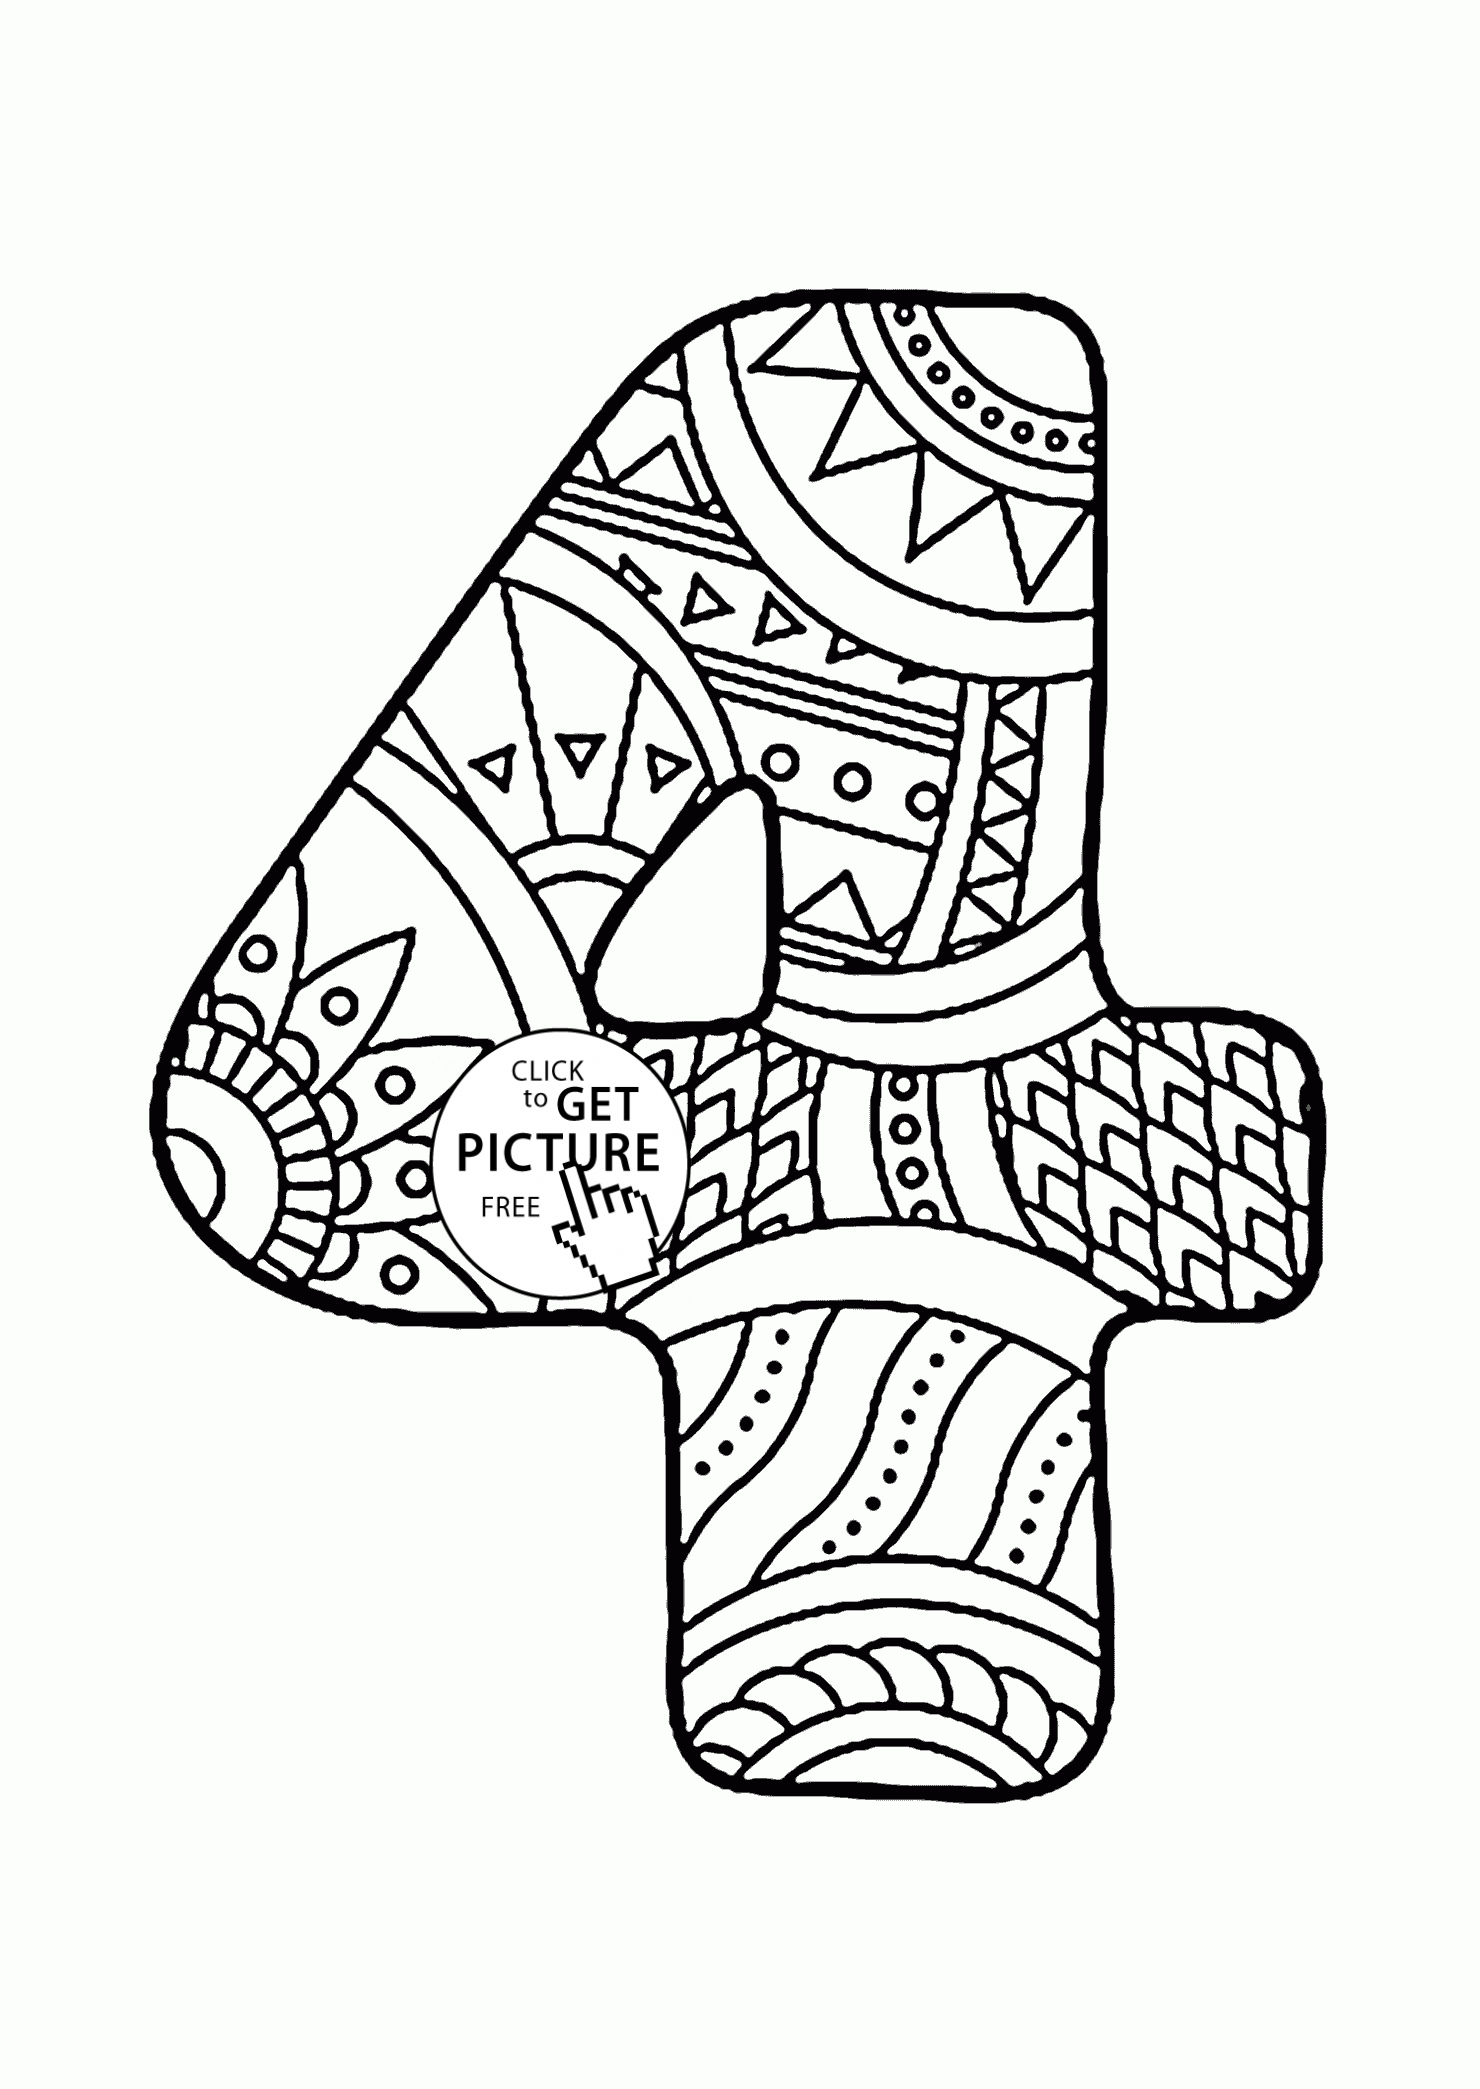 Pattern Number 4 coloring pages for kids, counting numbers ...